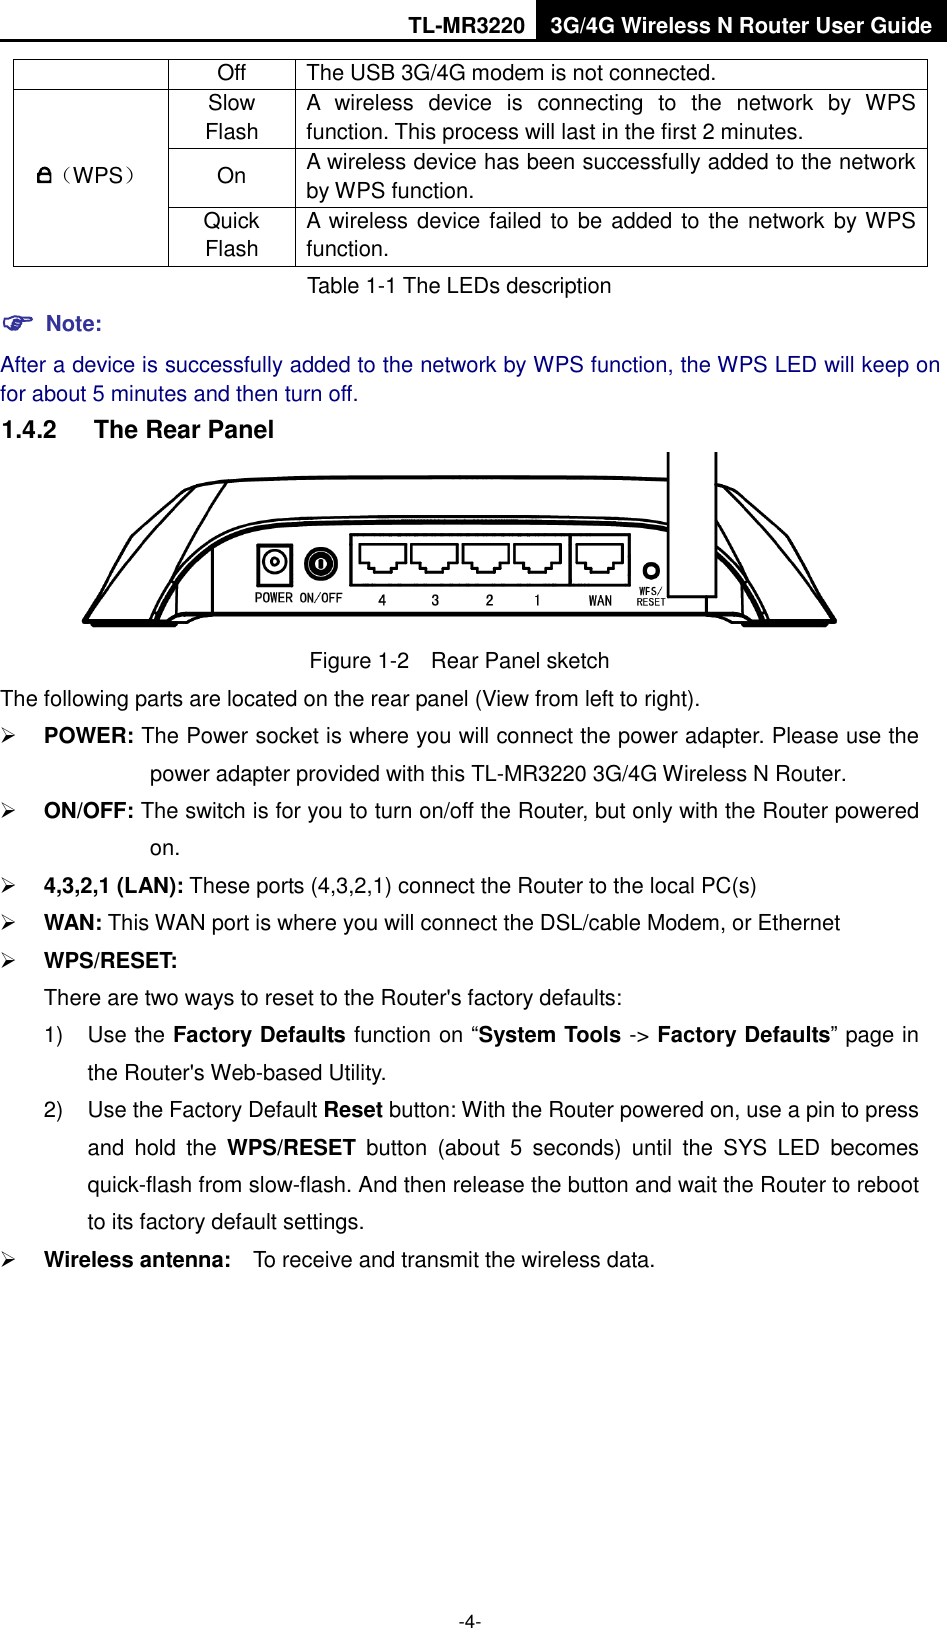 TL-MR3220 3G/4G Wireless N Router User Guide  -4- Off The USB 3G/4G modem is not connected. （WPS） Slow Flash A  wireless  device  is  connecting  to  the  network  by  WPS function. This process will last in the first 2 minutes. On A wireless device has been successfully added to the network by WPS function.   Quick Flash A  wireless device failed to be added to the network by WPS function. Table 1-1 The LEDs description  Note: After a device is successfully added to the network by WPS function, the WPS LED will keep on for about 5 minutes and then turn off. 1.4.2  The Rear Panel    Figure 1-2    Rear Panel sketch The following parts are located on the rear panel (View from left to right).  POWER: The Power socket is where you will connect the power adapter. Please use the power adapter provided with this TL-MR3220 3G/4G Wireless N Router.    ON/OFF: The switch is for you to turn on/off the Router, but only with the Router powered on.  4,3,2,1 (LAN): These ports (4,3,2,1) connect the Router to the local PC(s)  WAN: This WAN port is where you will connect the DSL/cable Modem, or Ethernet    WPS/RESET: There are two ways to reset to the Router&apos;s factory defaults: 1)  Use the Factory Defaults function on “System Tools -&gt; Factory Defaults” page in the Router&apos;s Web-based Utility. 2)  Use the Factory Default Reset button: With the Router powered on, use a pin to press and  hold  the  WPS/RESET  button  (about  5  seconds)  until  the  SYS  LED  becomes quick-flash from slow-flash. And then release the button and wait the Router to reboot to its factory default settings.  Wireless antenna:    To receive and transmit the wireless data. 